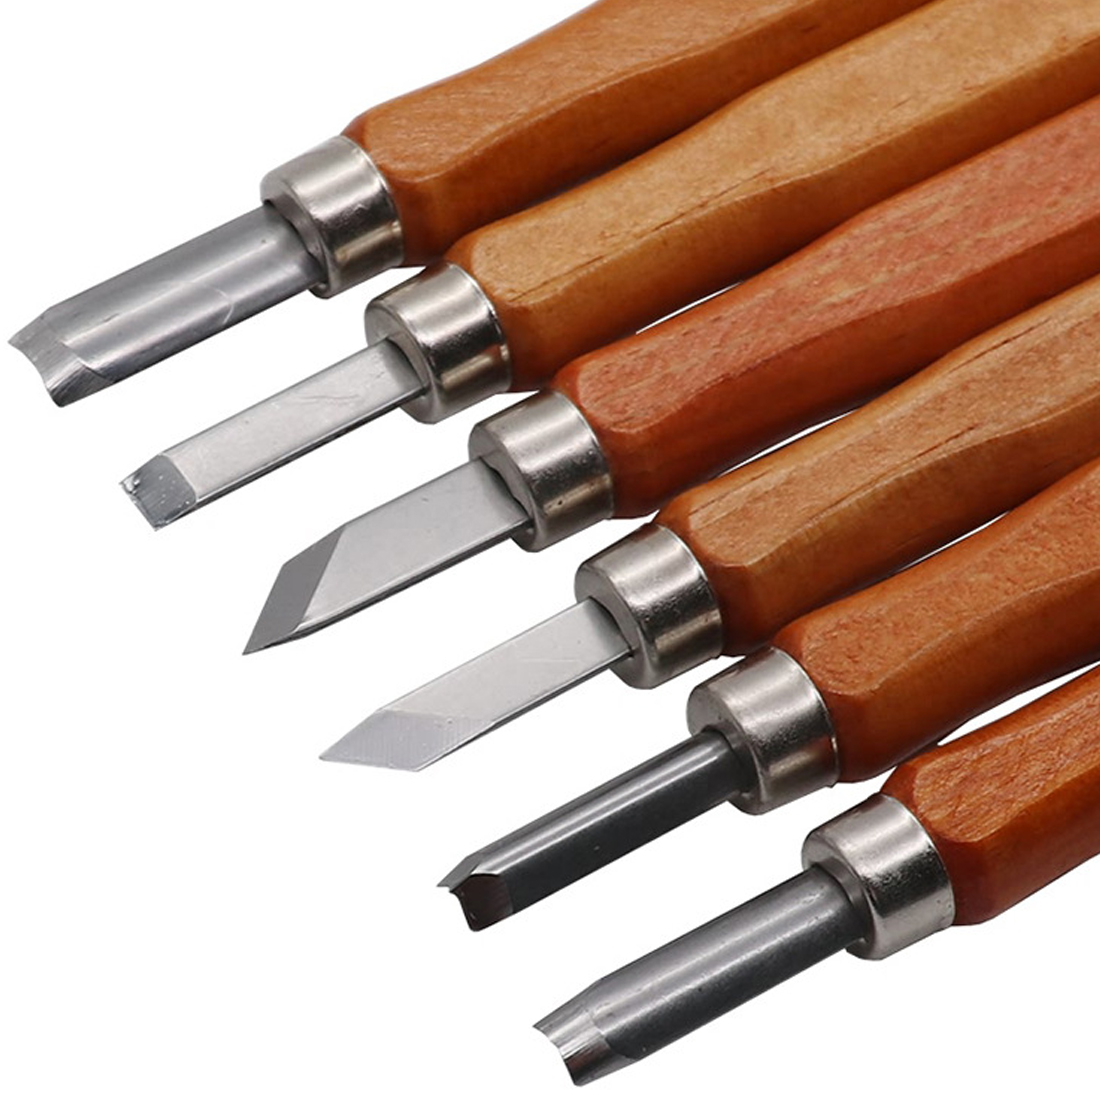 Hot Sale 12pcs Wood Carving Tools Set Chisel Gouges Woodcut Knife Scorper Hand Cutter for Arts Crafts DIY Tools Woodworking Tool